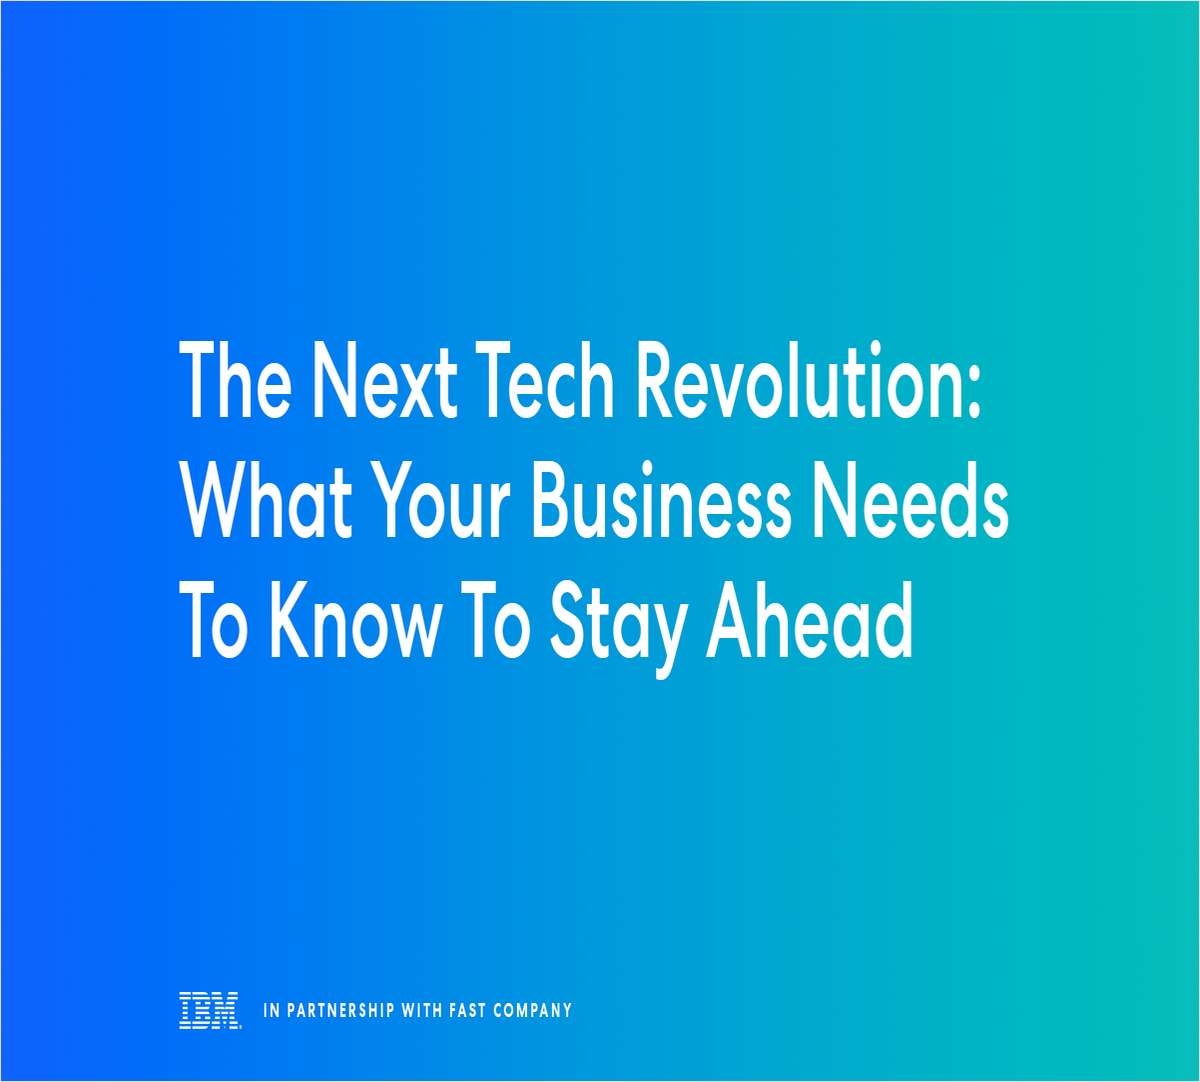 The Next Tech Revolution: What Your Business Needs To Know To Stay Ahead